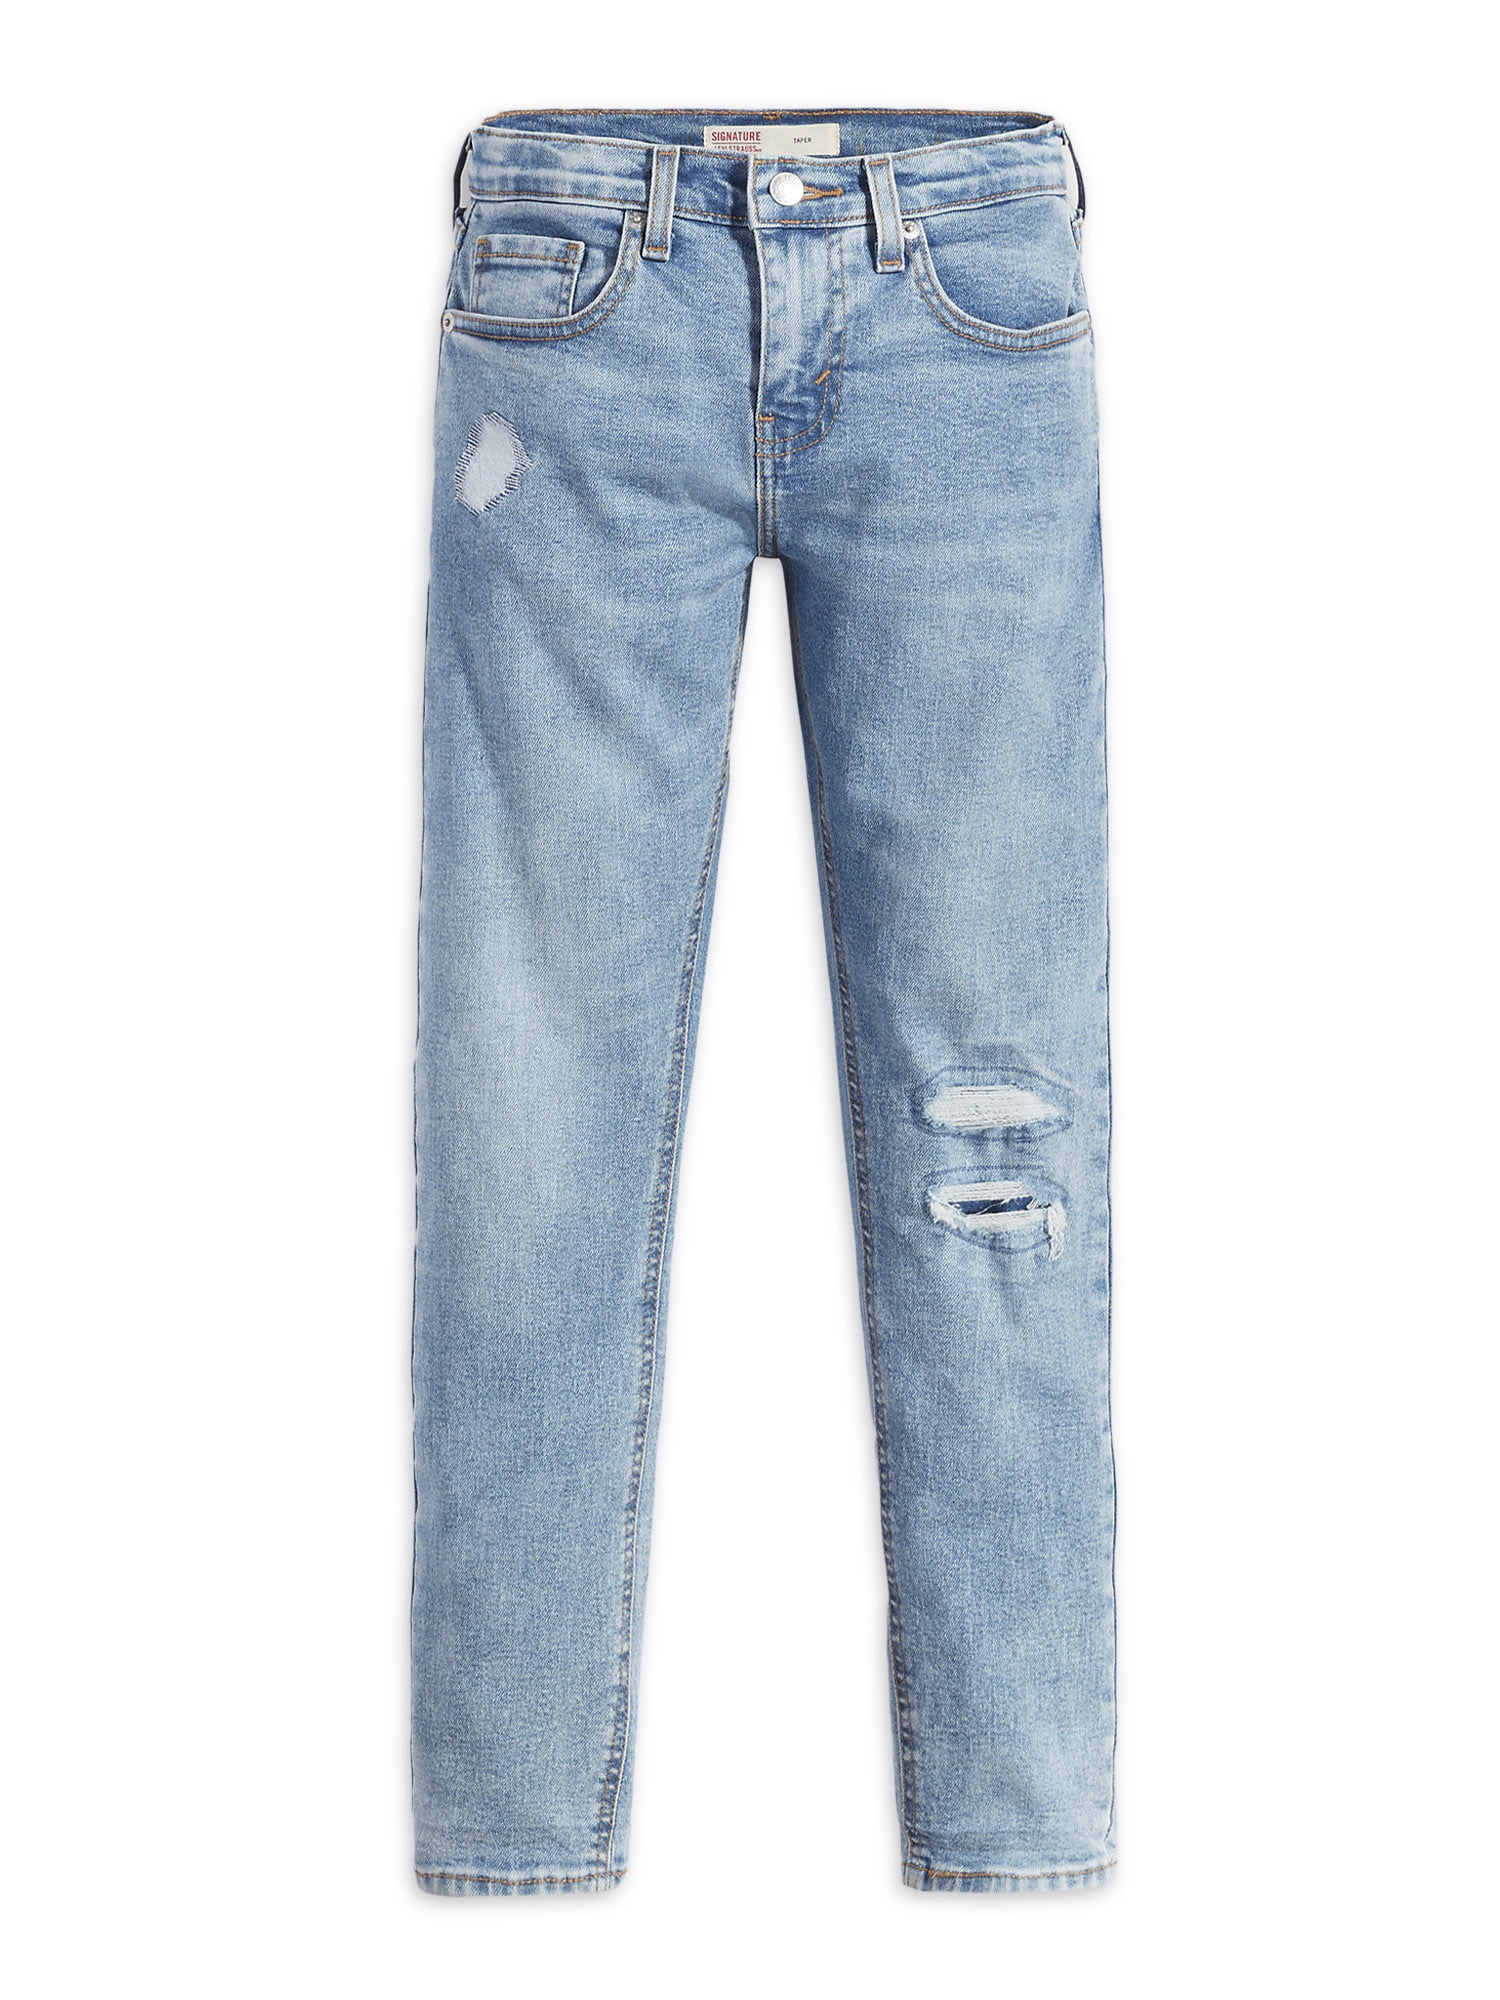 Signature By Levi Strauss & Co. Boys Taper Jeans, Sizes 8-18 - Walmart.com